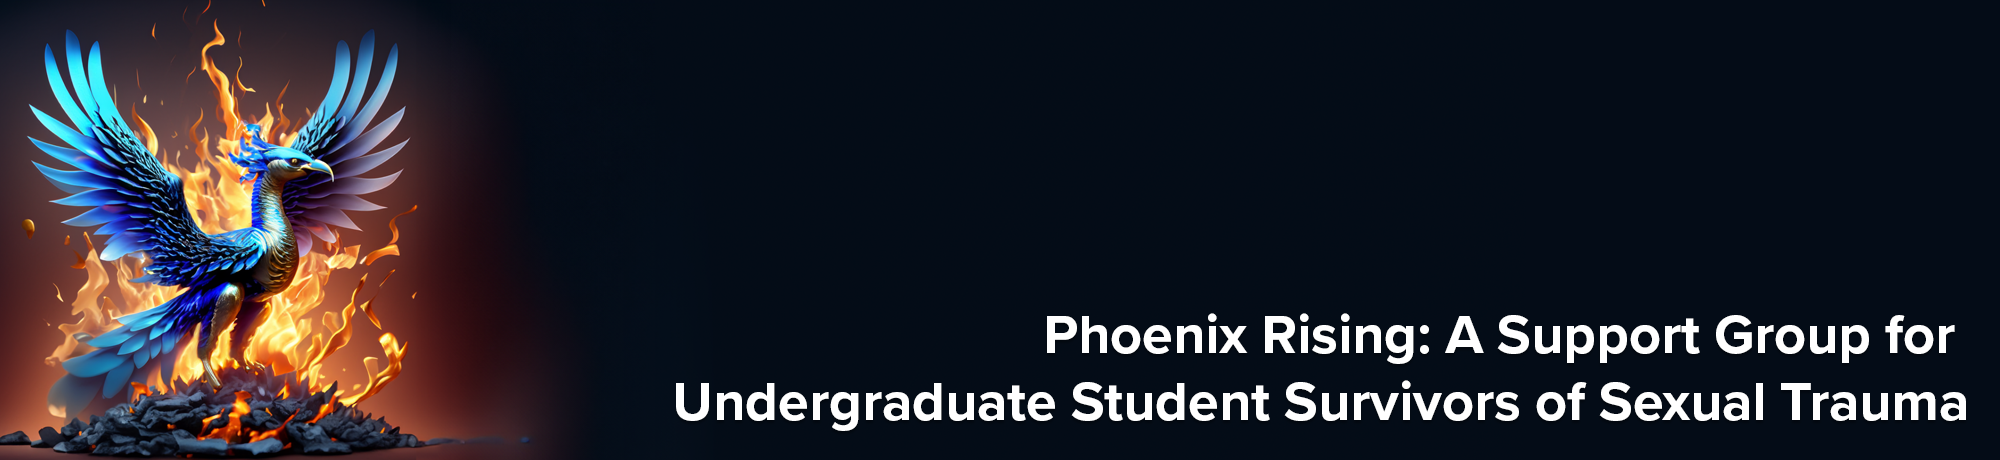 Phoenix Rising: A Support Group for Undergraduate Student Survivors of Sexual Trauma Group Banner